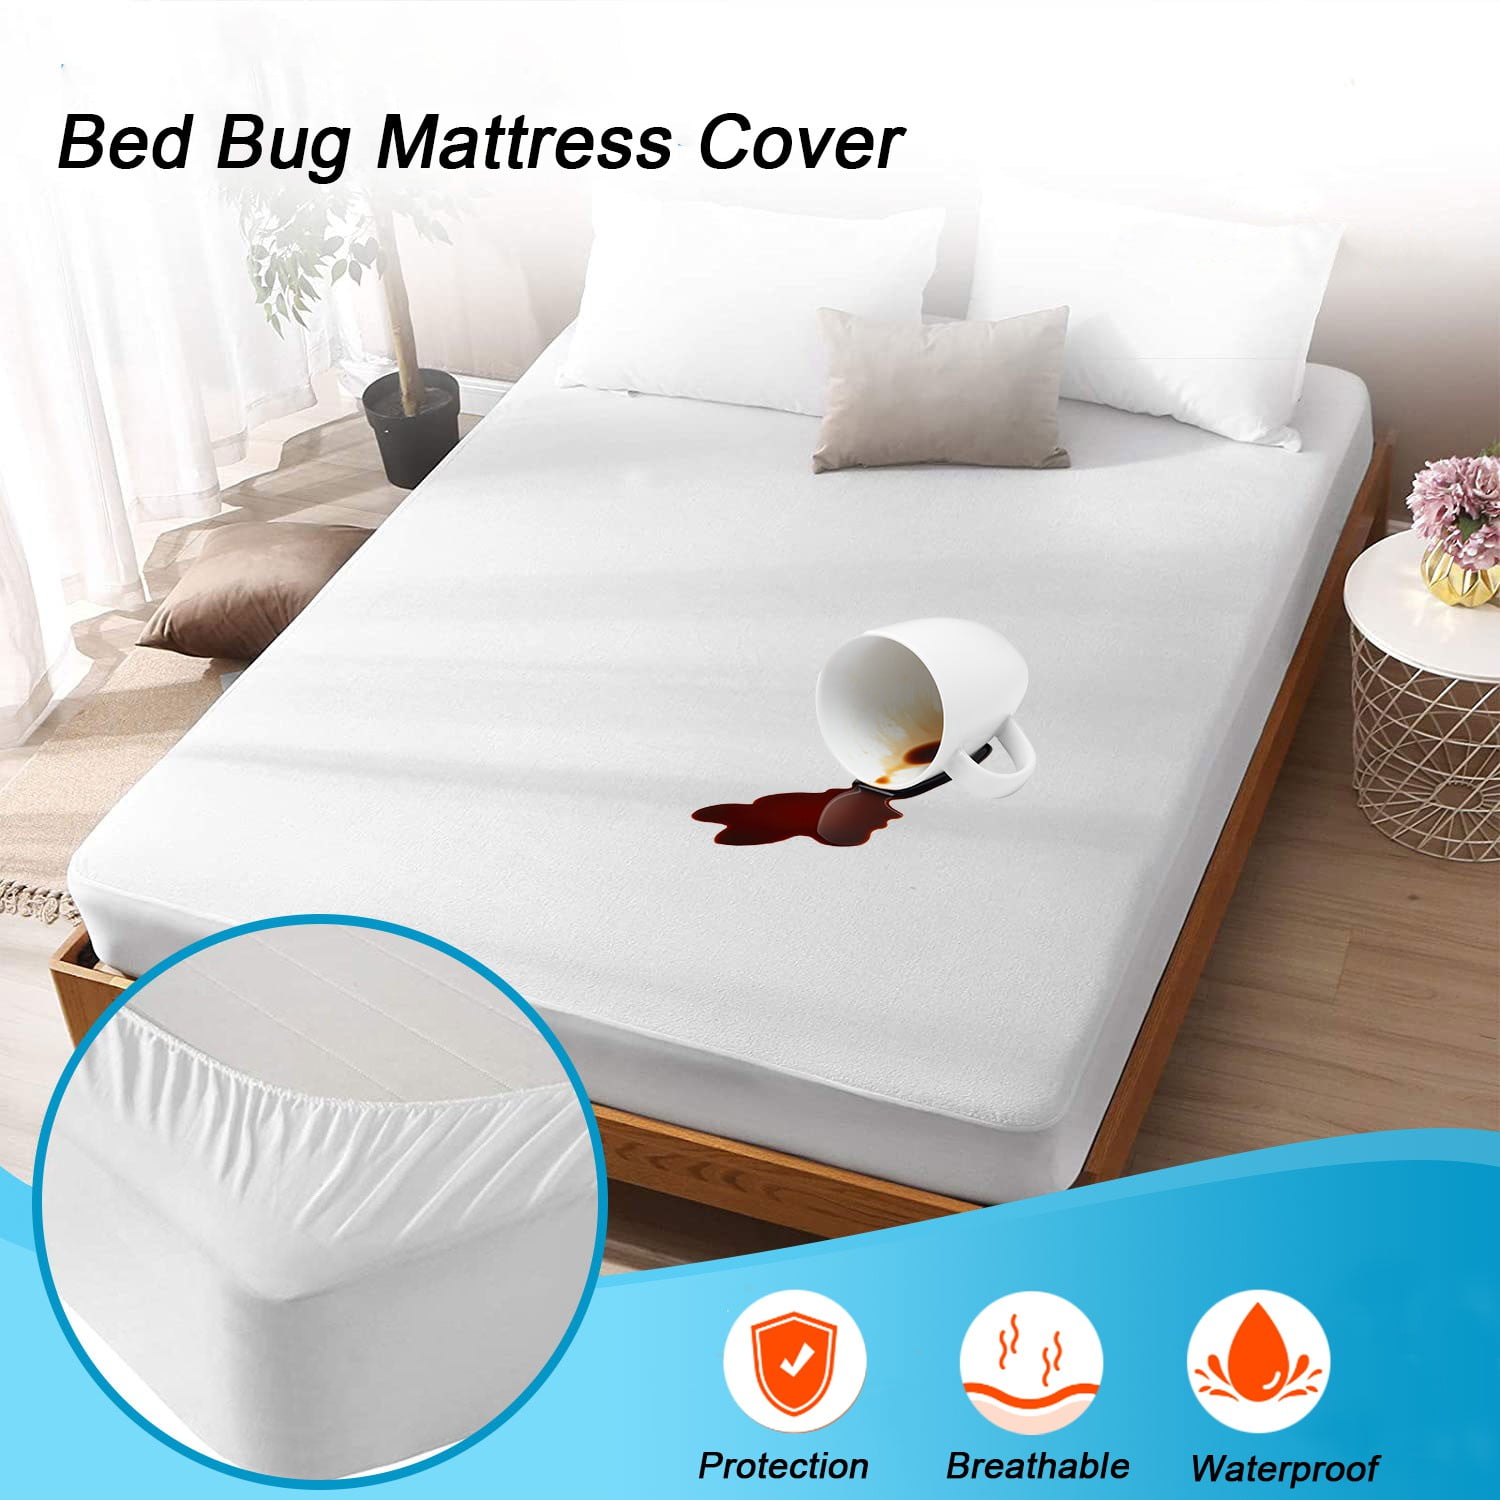 Details about   King Size Quilted Fitted Mattress Pad 100% Waterproof Breathable Mattress Prote 